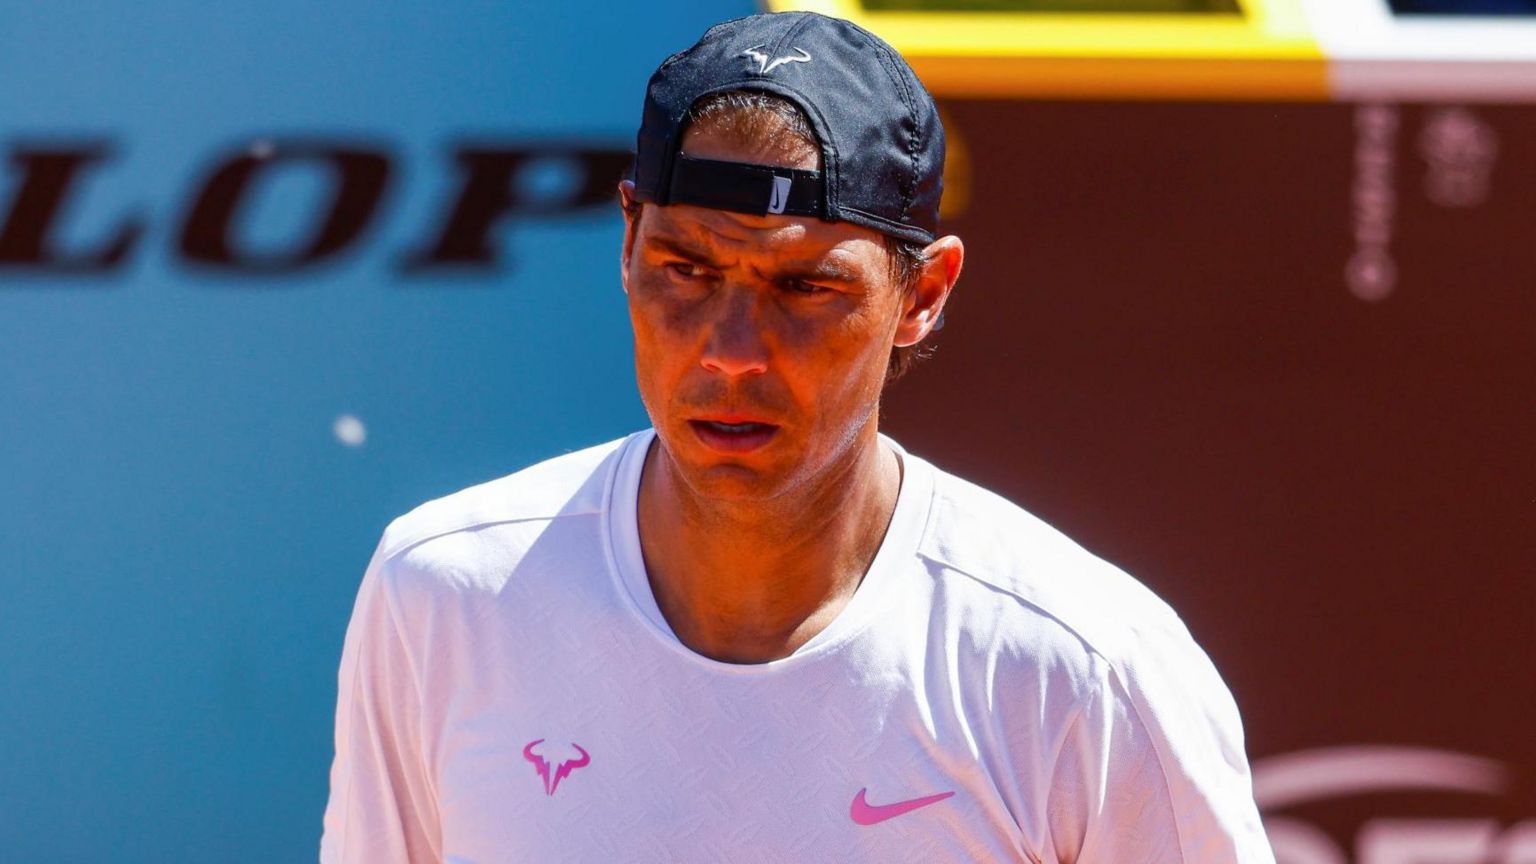 Rafael Nadal practices for the Madrid Open